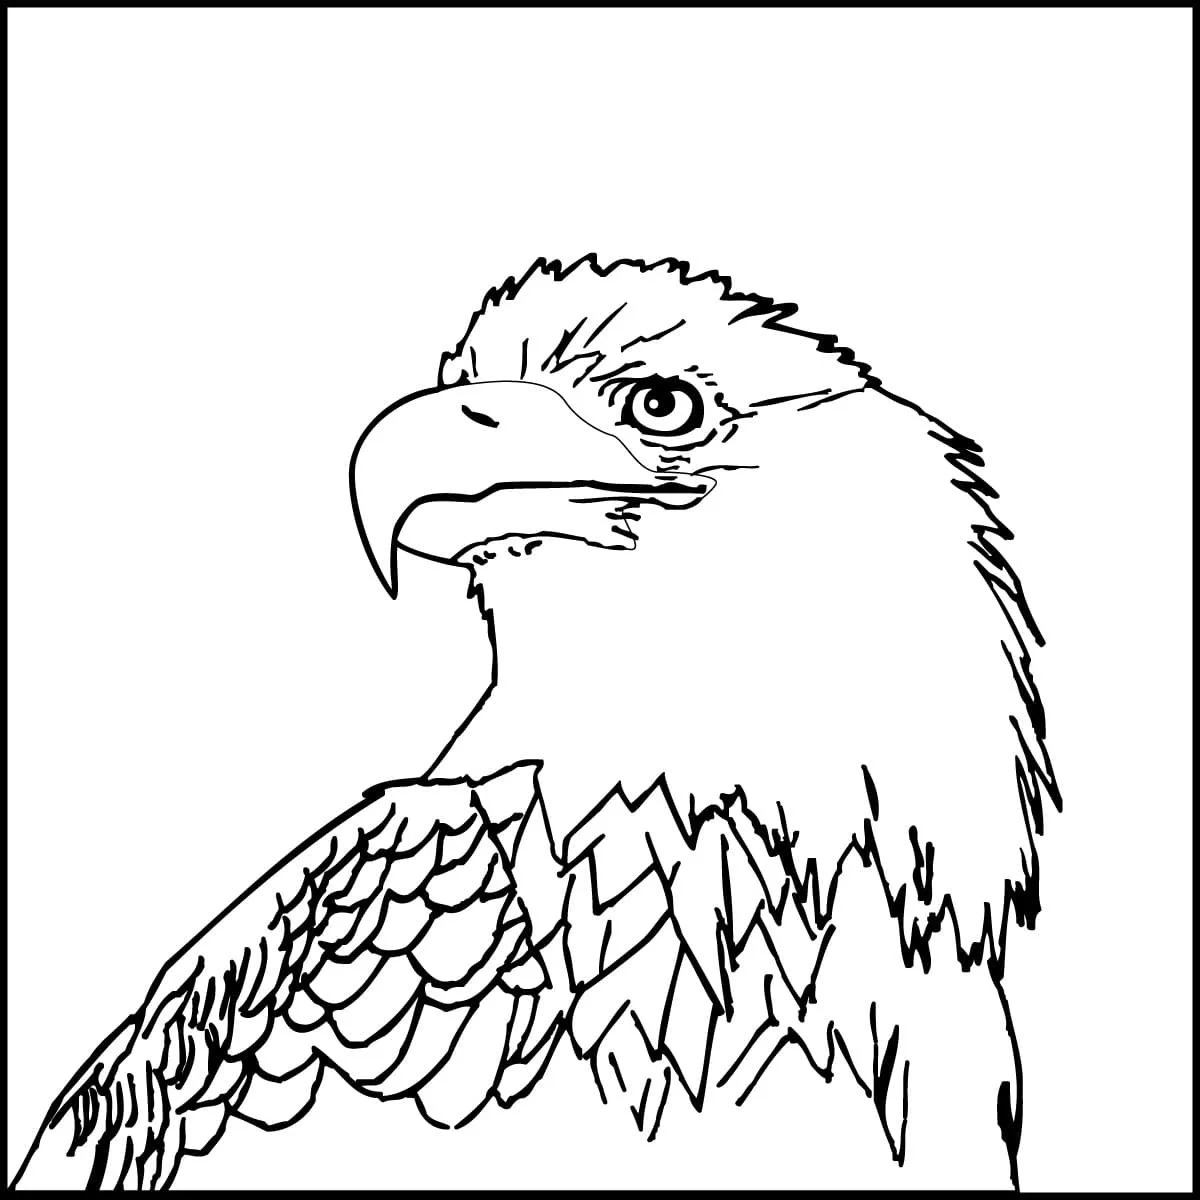 Bald Eagle Coloring Pages